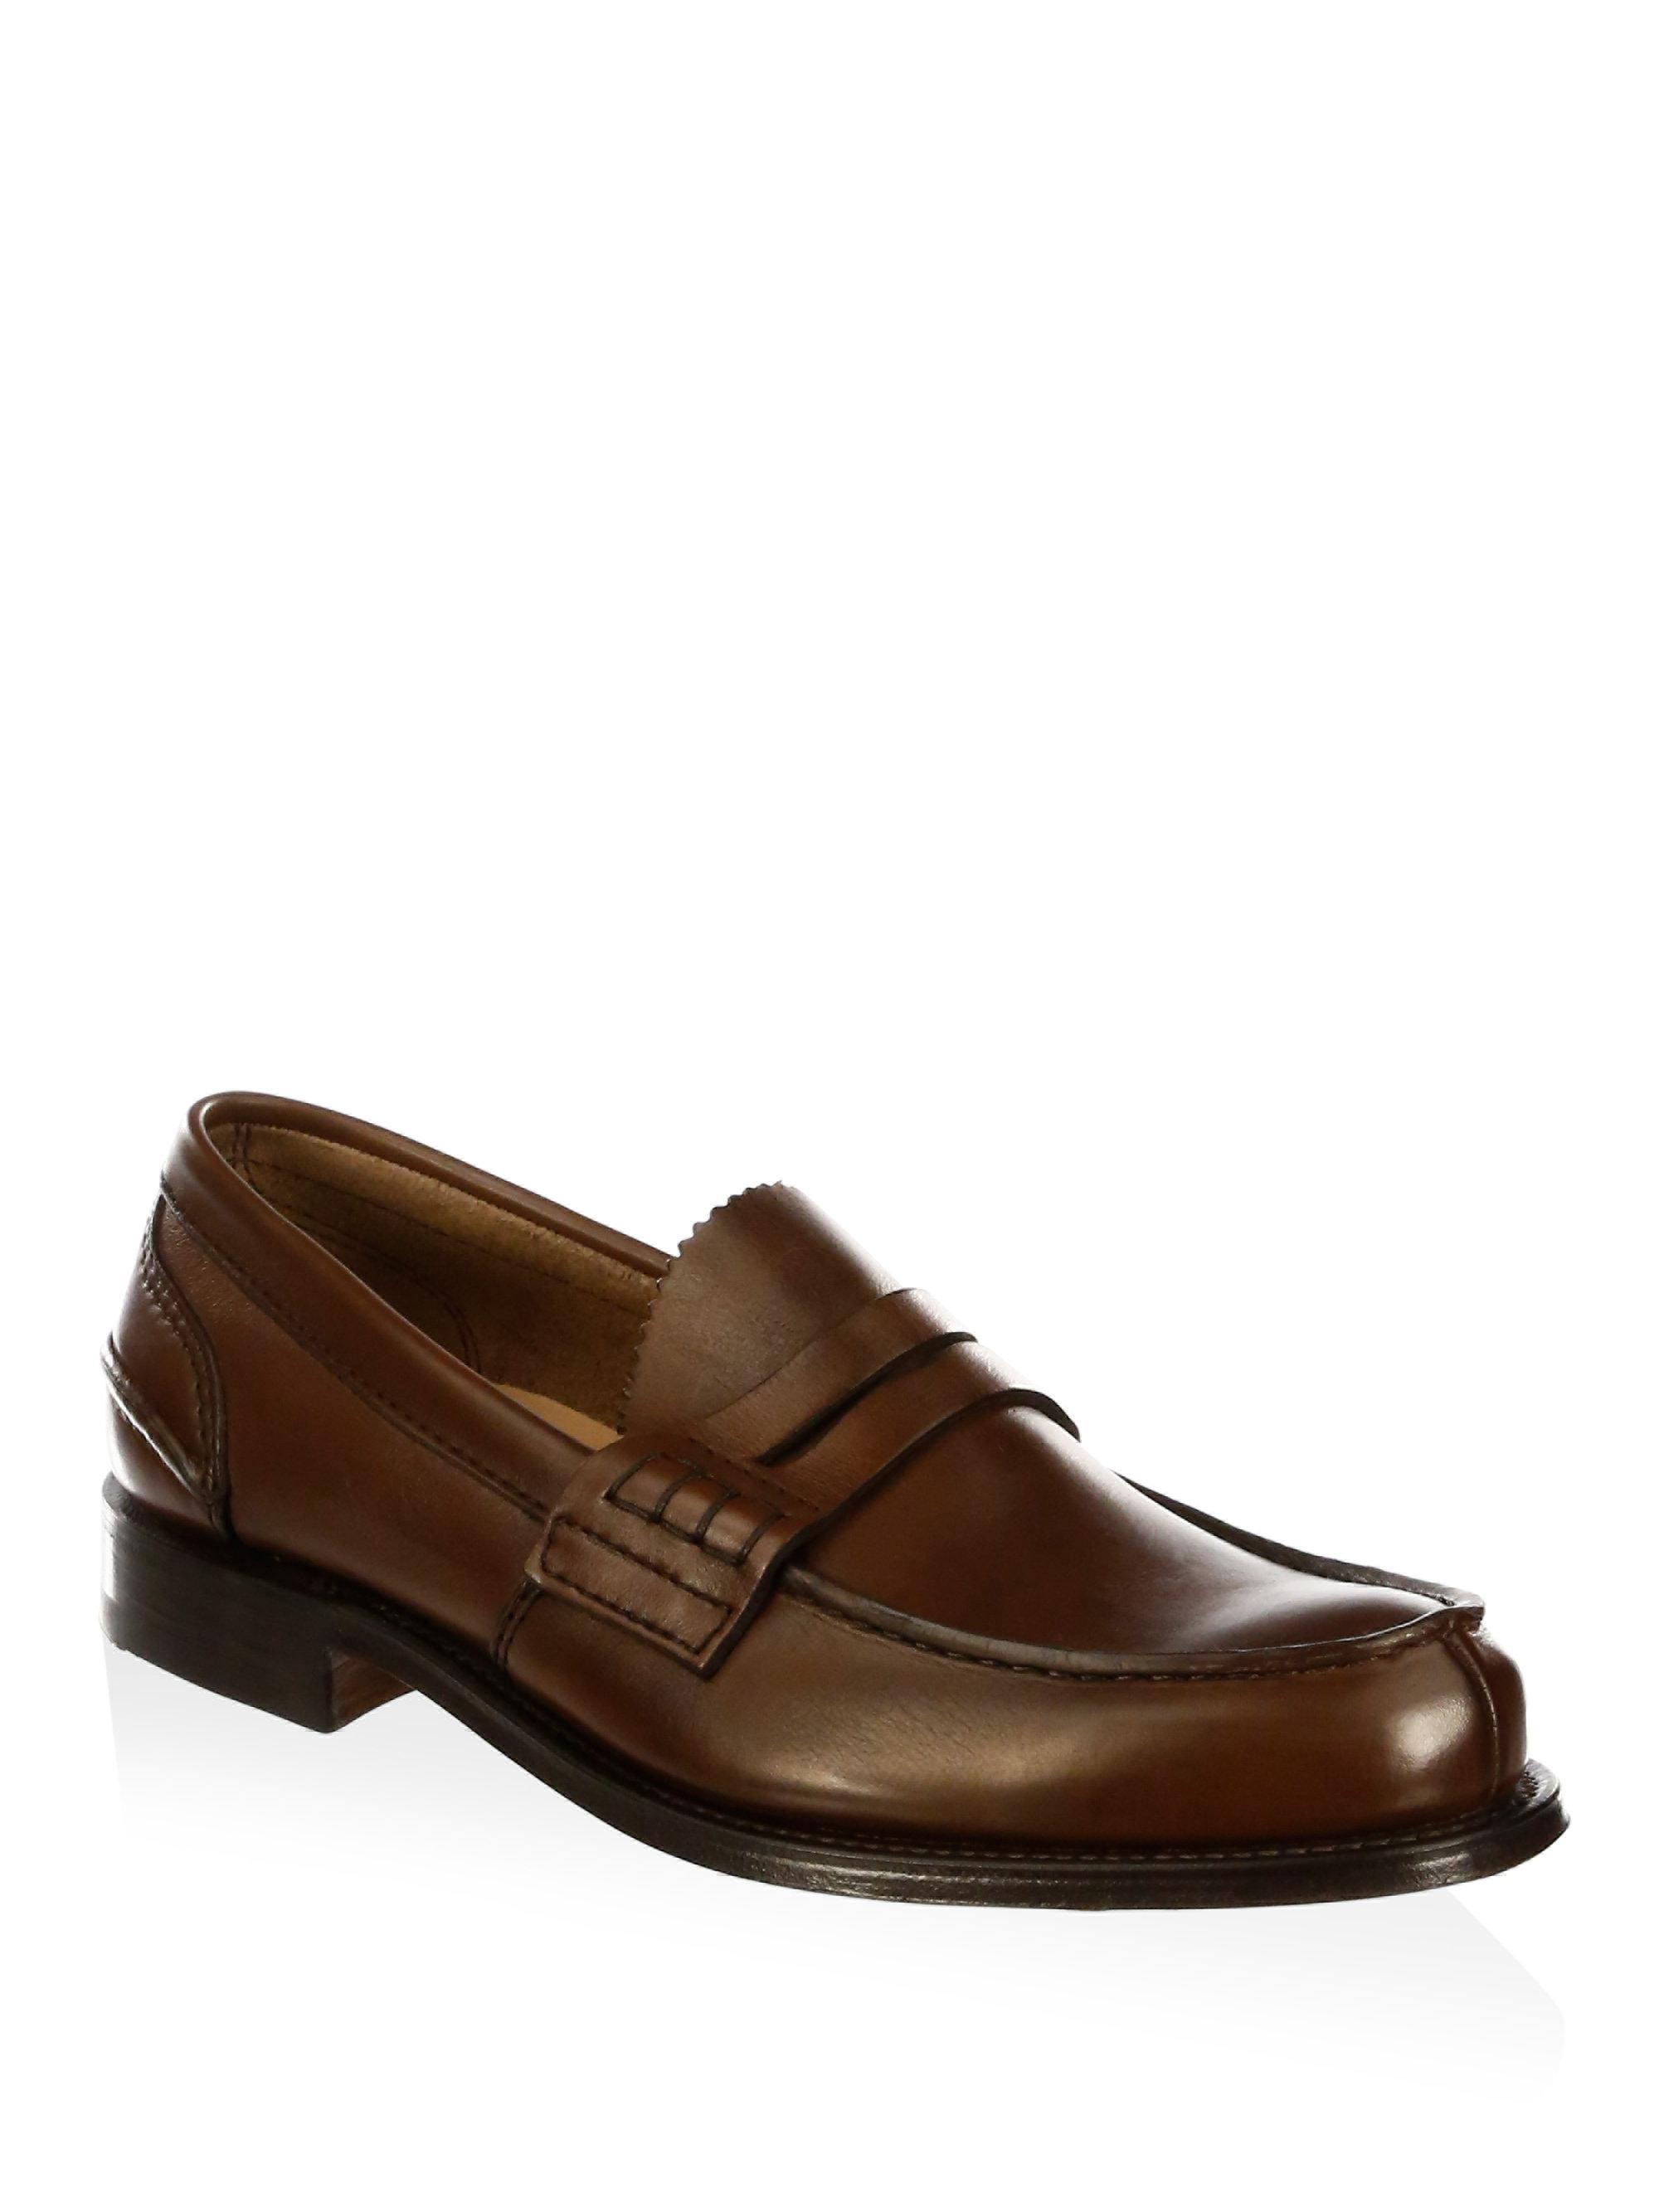 Church's Pembrey Leather Penny Loafers in Brown for Men - Lyst